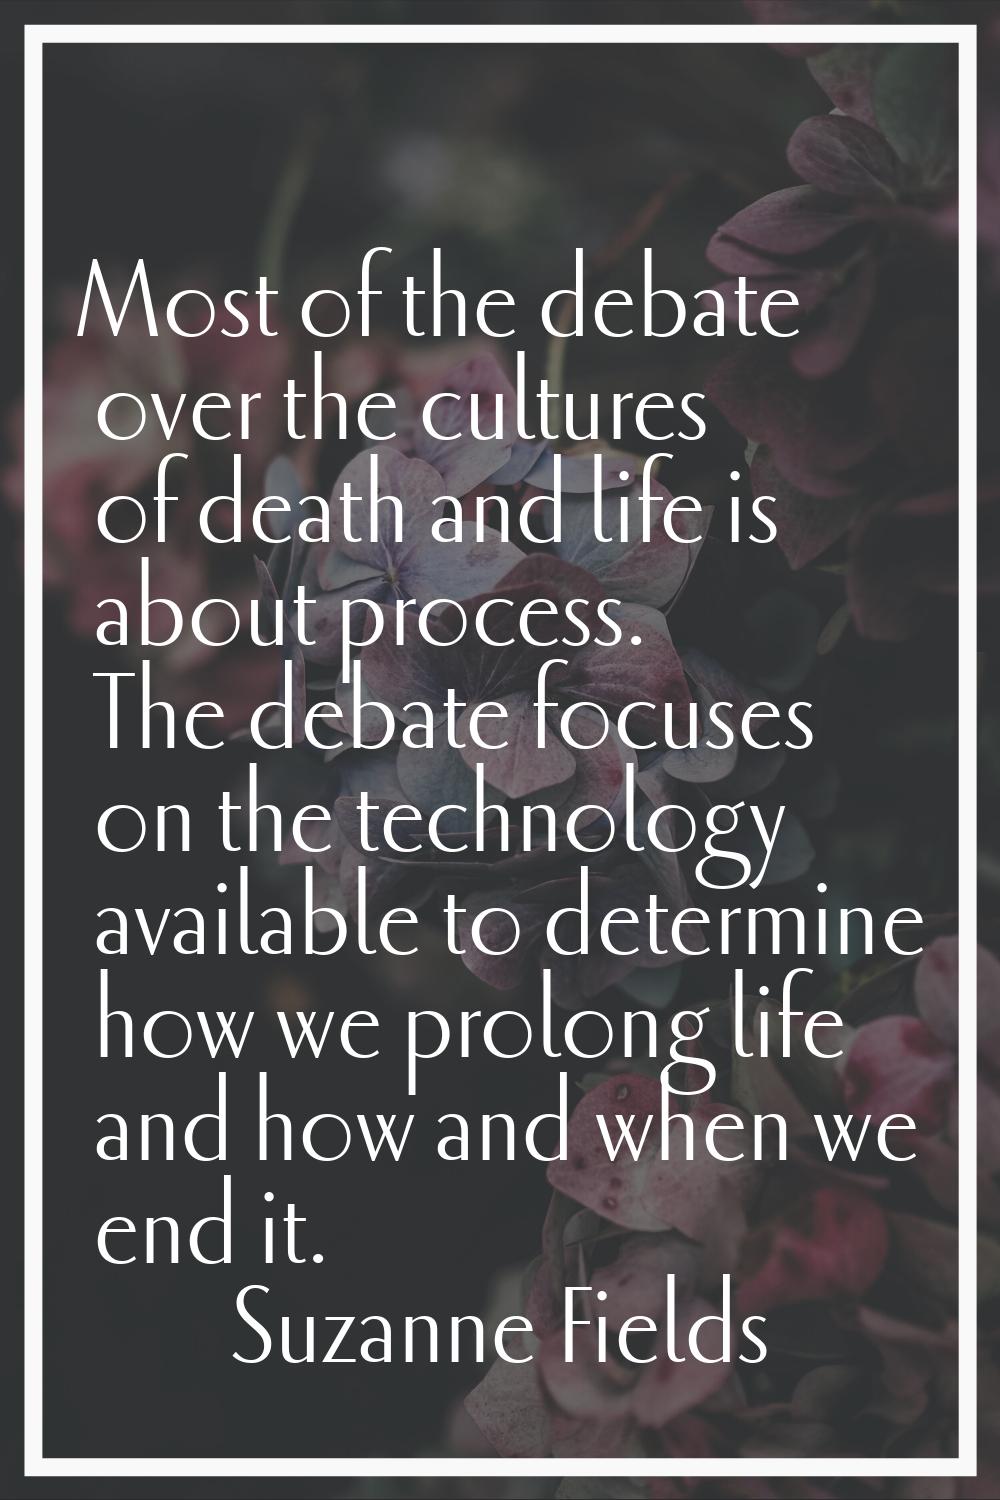 Most of the debate over the cultures of death and life is about process. The debate focuses on the 